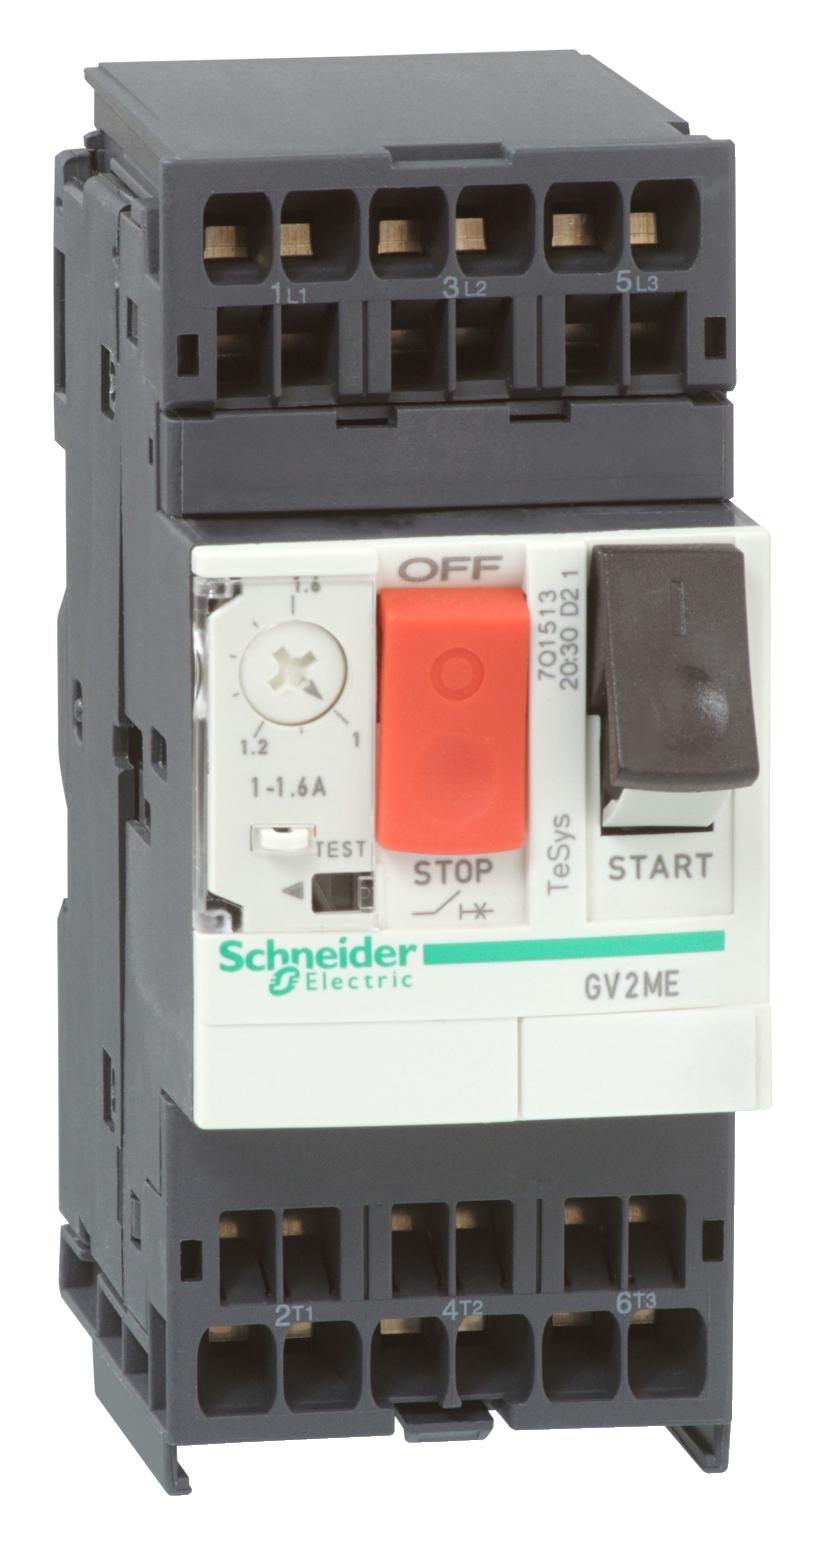 GV2ME223 THERMAL MAGNETIC CIRCUIT BREAKER SCHNEIDER ELECTRIC